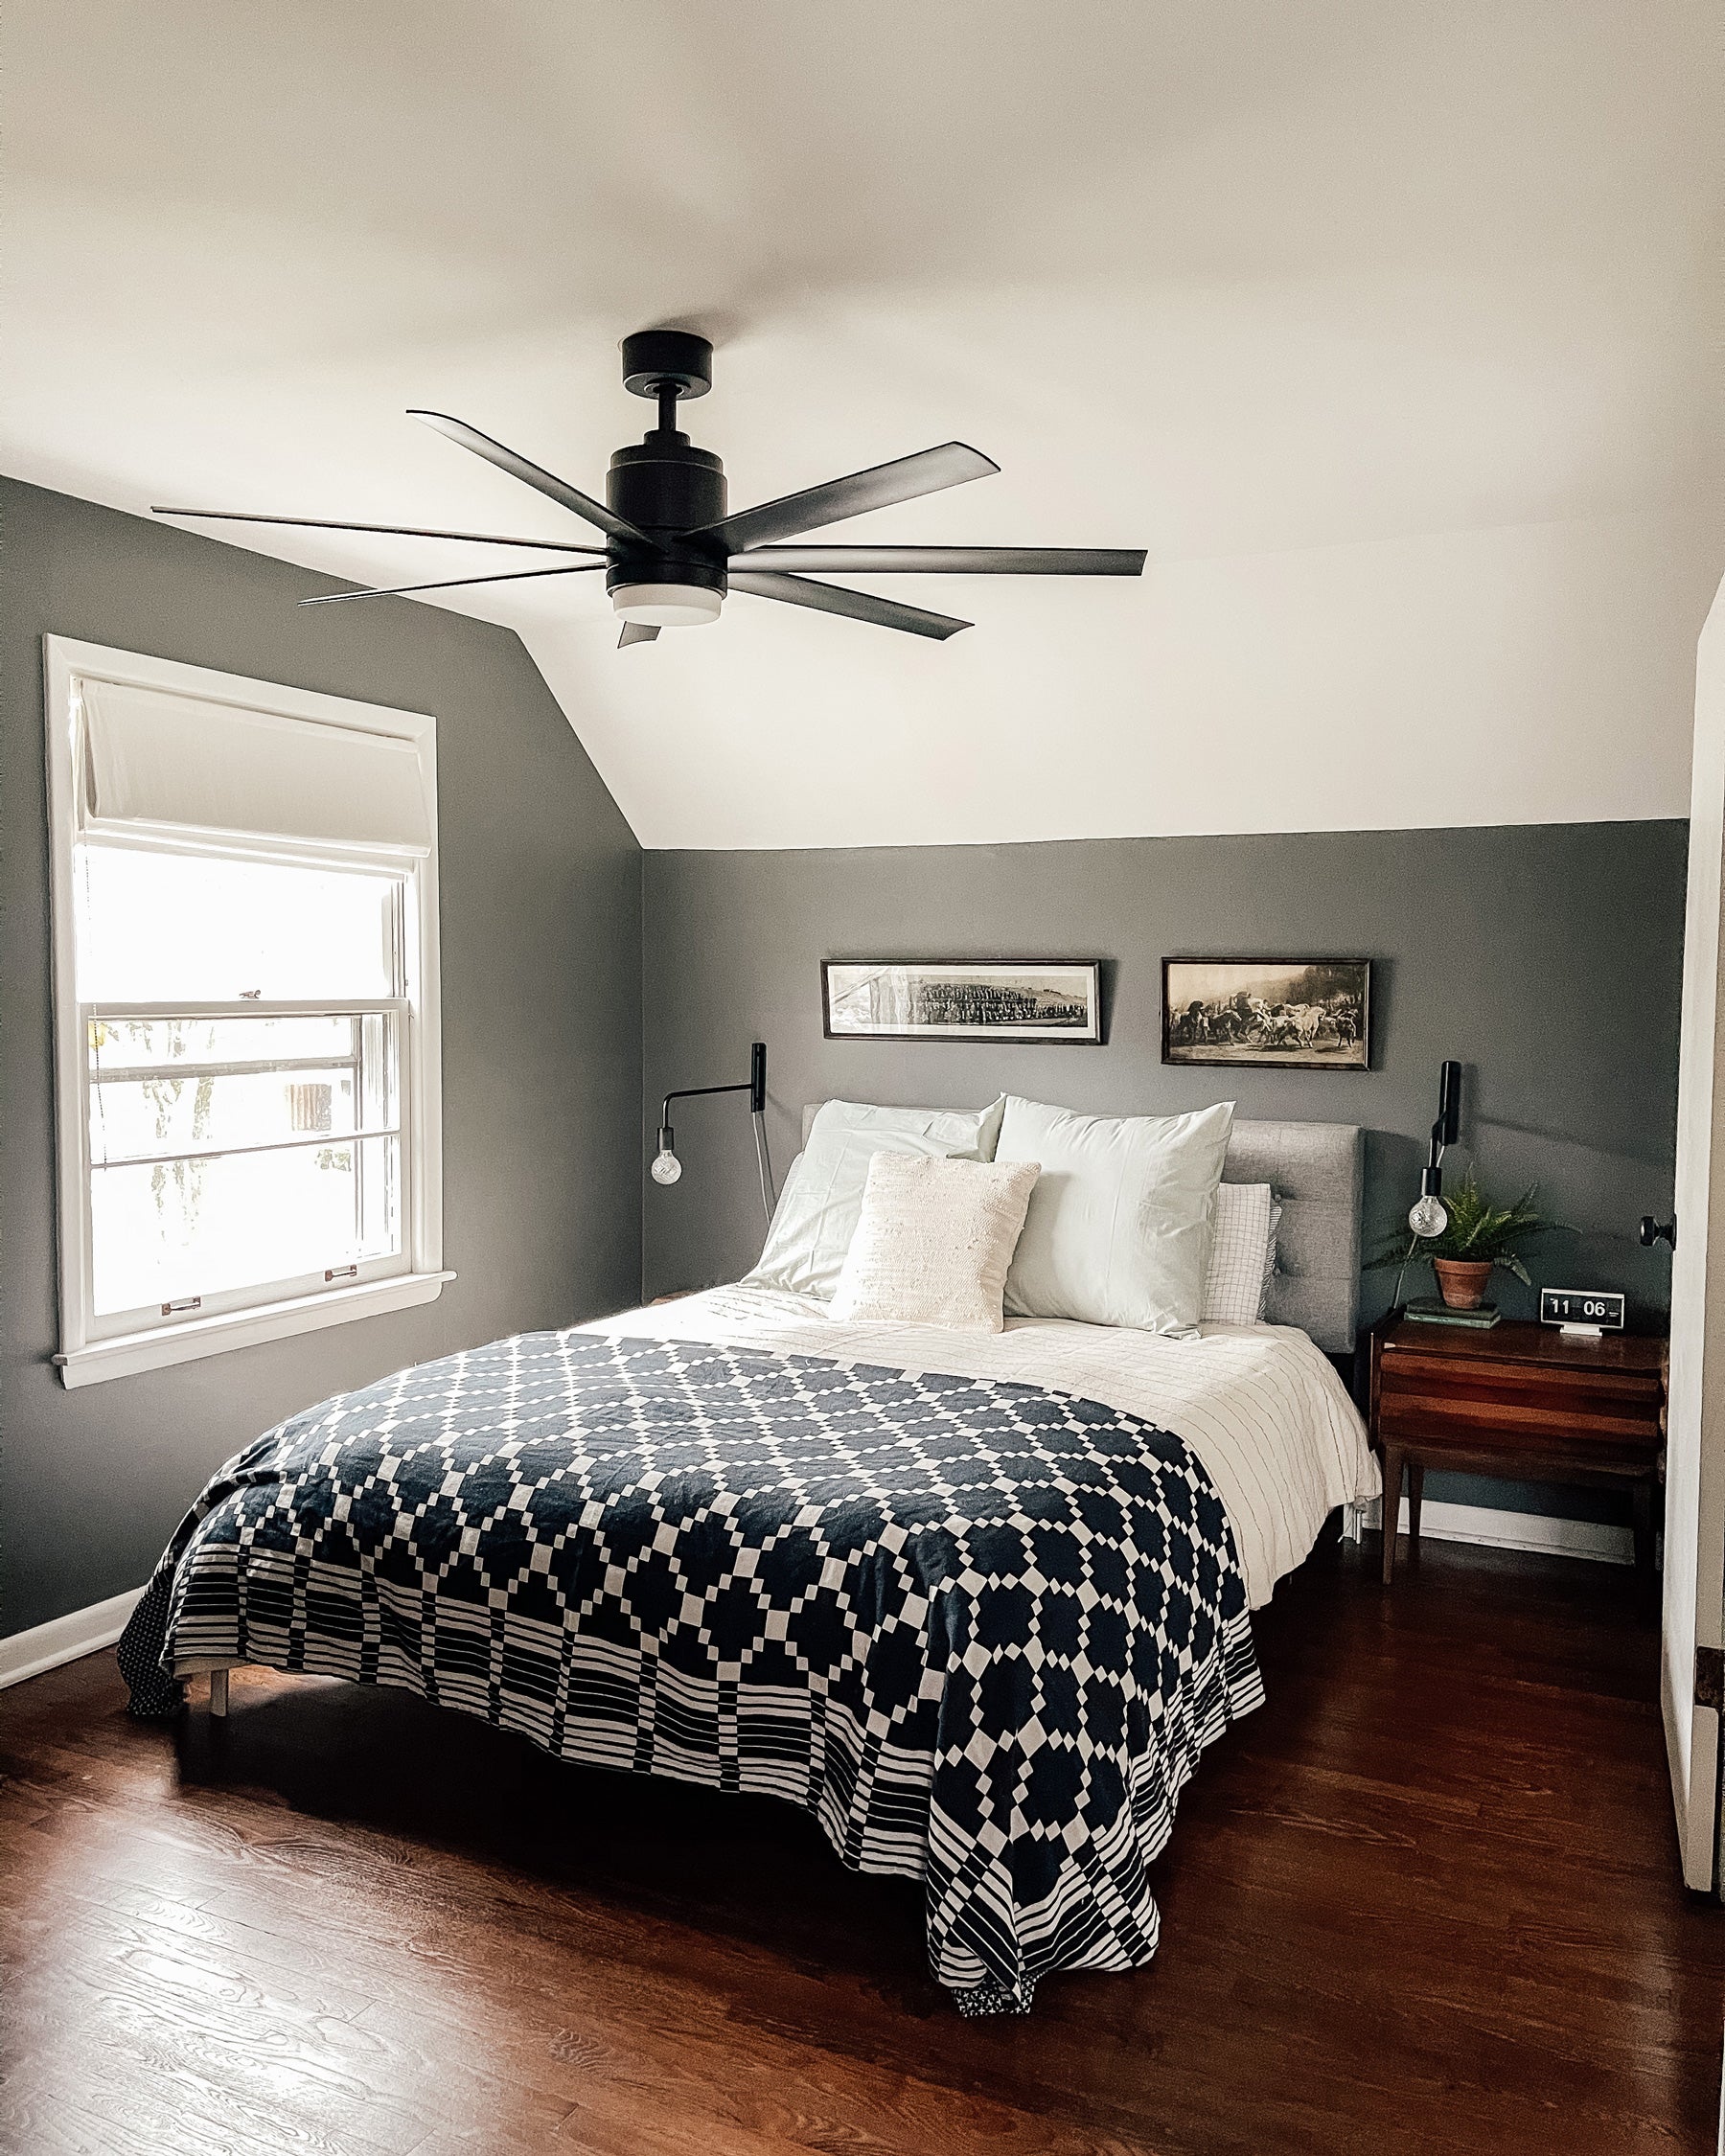 bedroom with a ceiling fan and a black and white bedspread